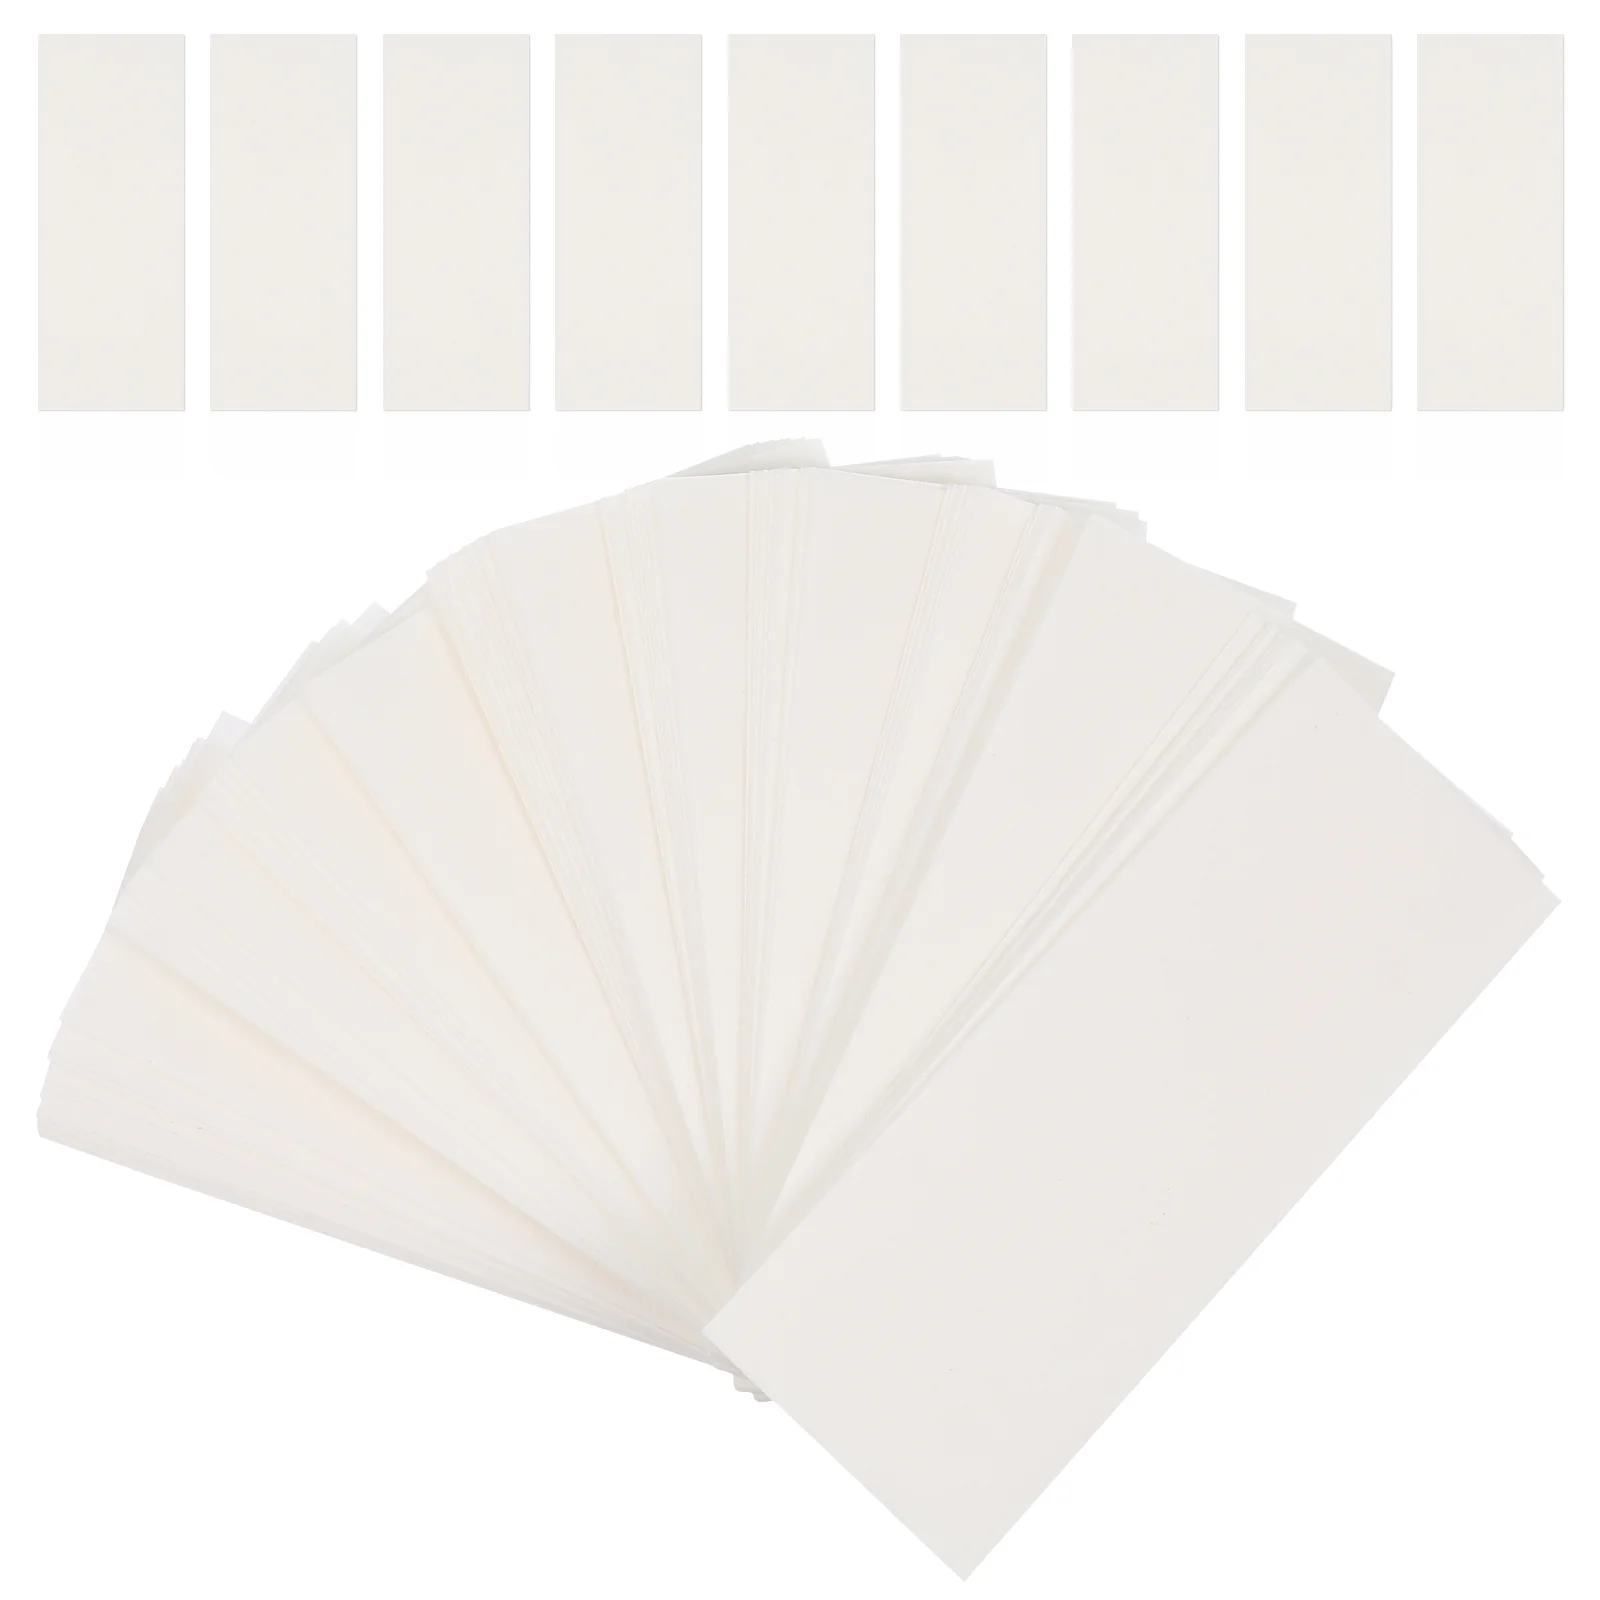 

500 Pcs Quantitative Filter Papers Chromatography Paper Strips Laboratory Cleaning Papers Blotting Papers for Laboratories